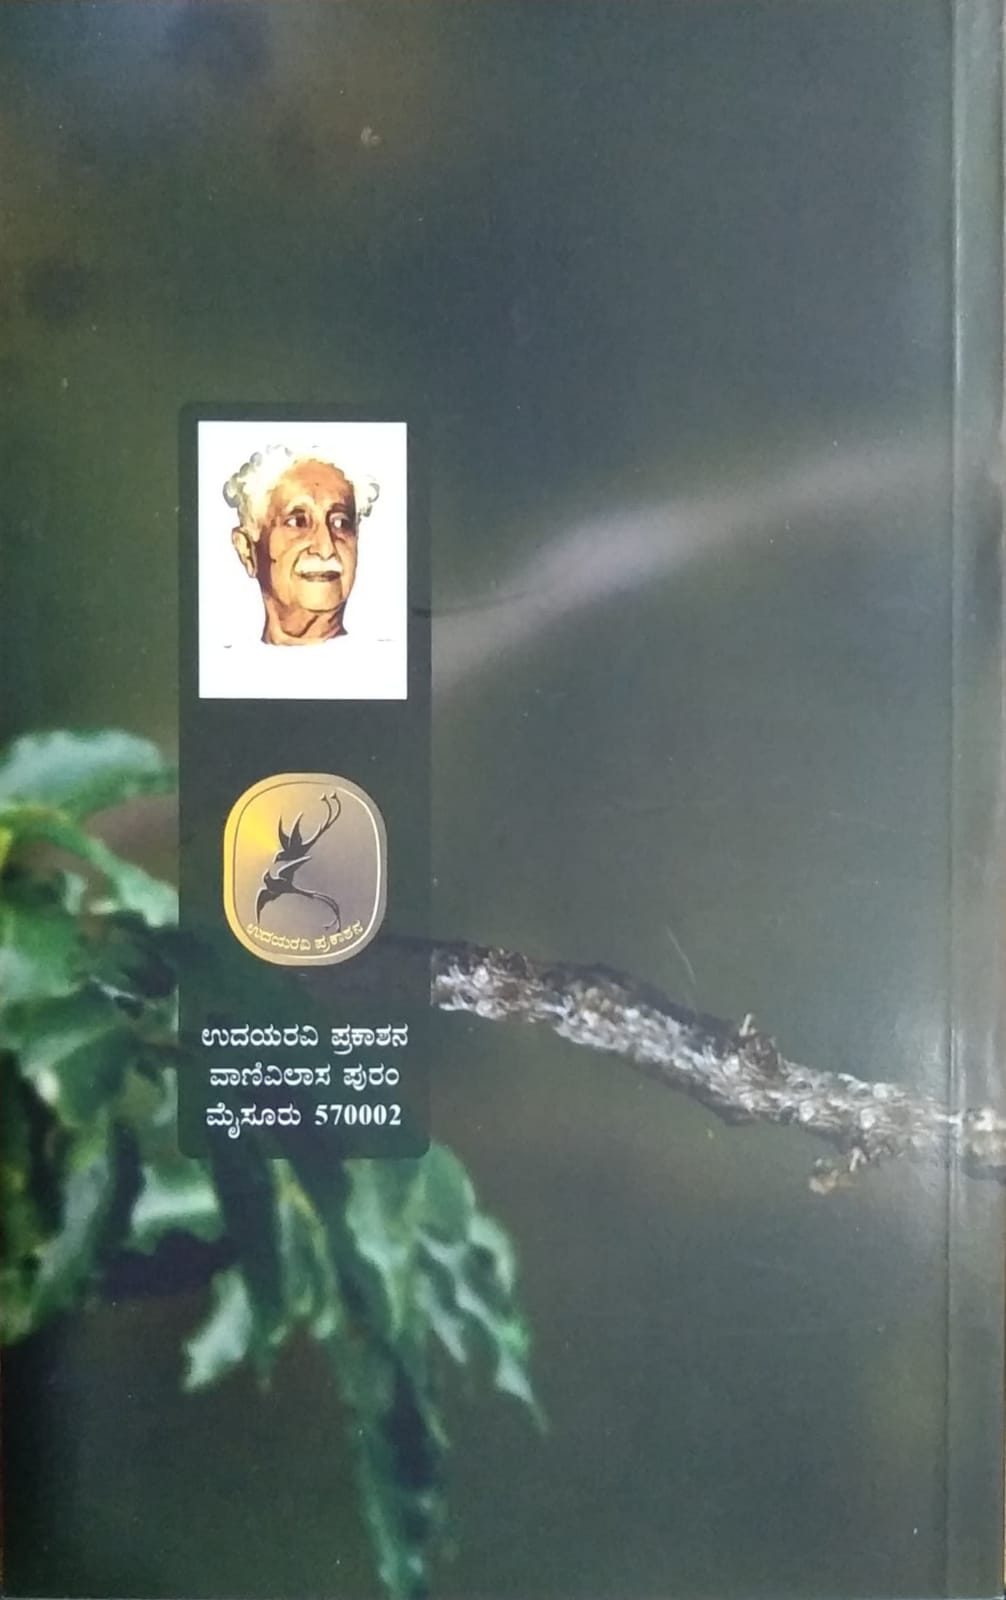 Prema Kashmira is a Kannada Book with a Collection of Poems Written by Kuvempu and Published by Pustaka Prakashana